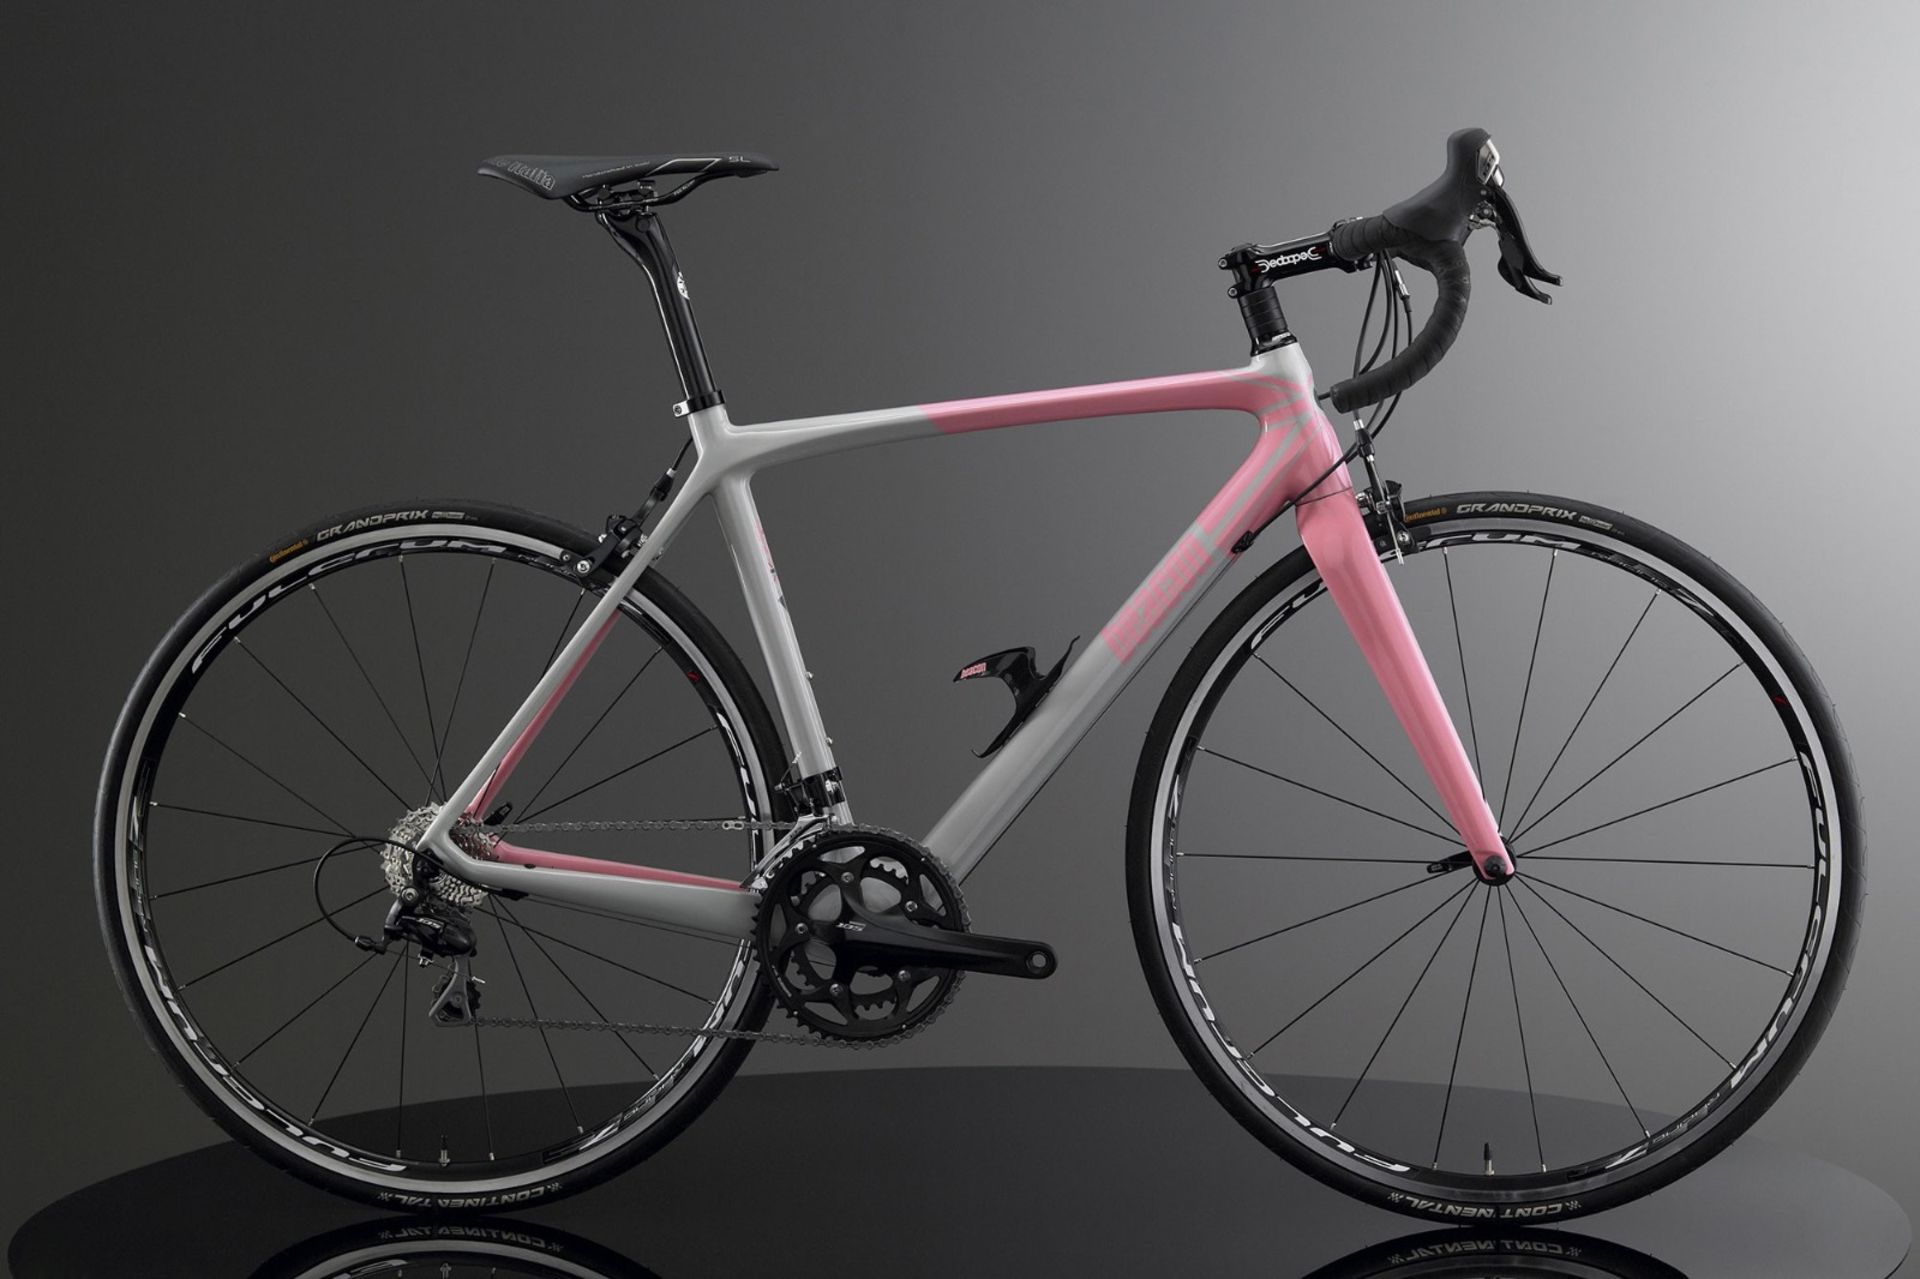 1 x Beacon Model BF-70, Size 590, Carbon Fibre Bike Frame in Pink & Grey. - Image 2 of 3